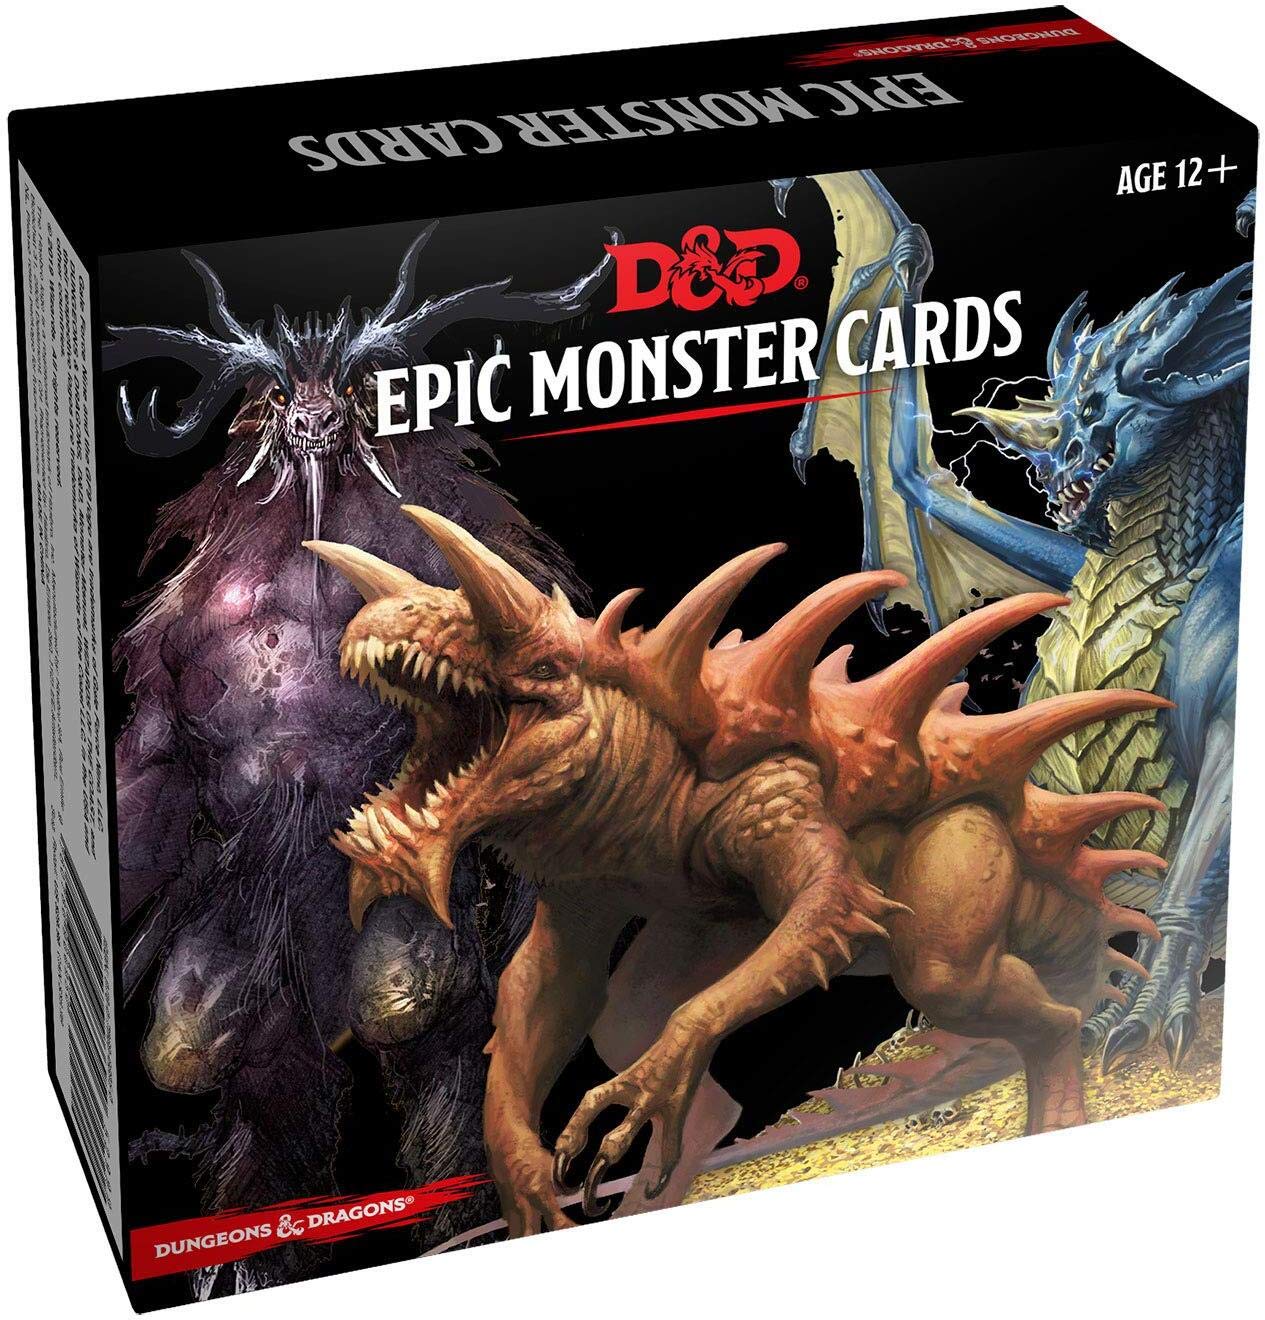 Dungeons & Dragons: Spellbook Cards: Epic Monsters